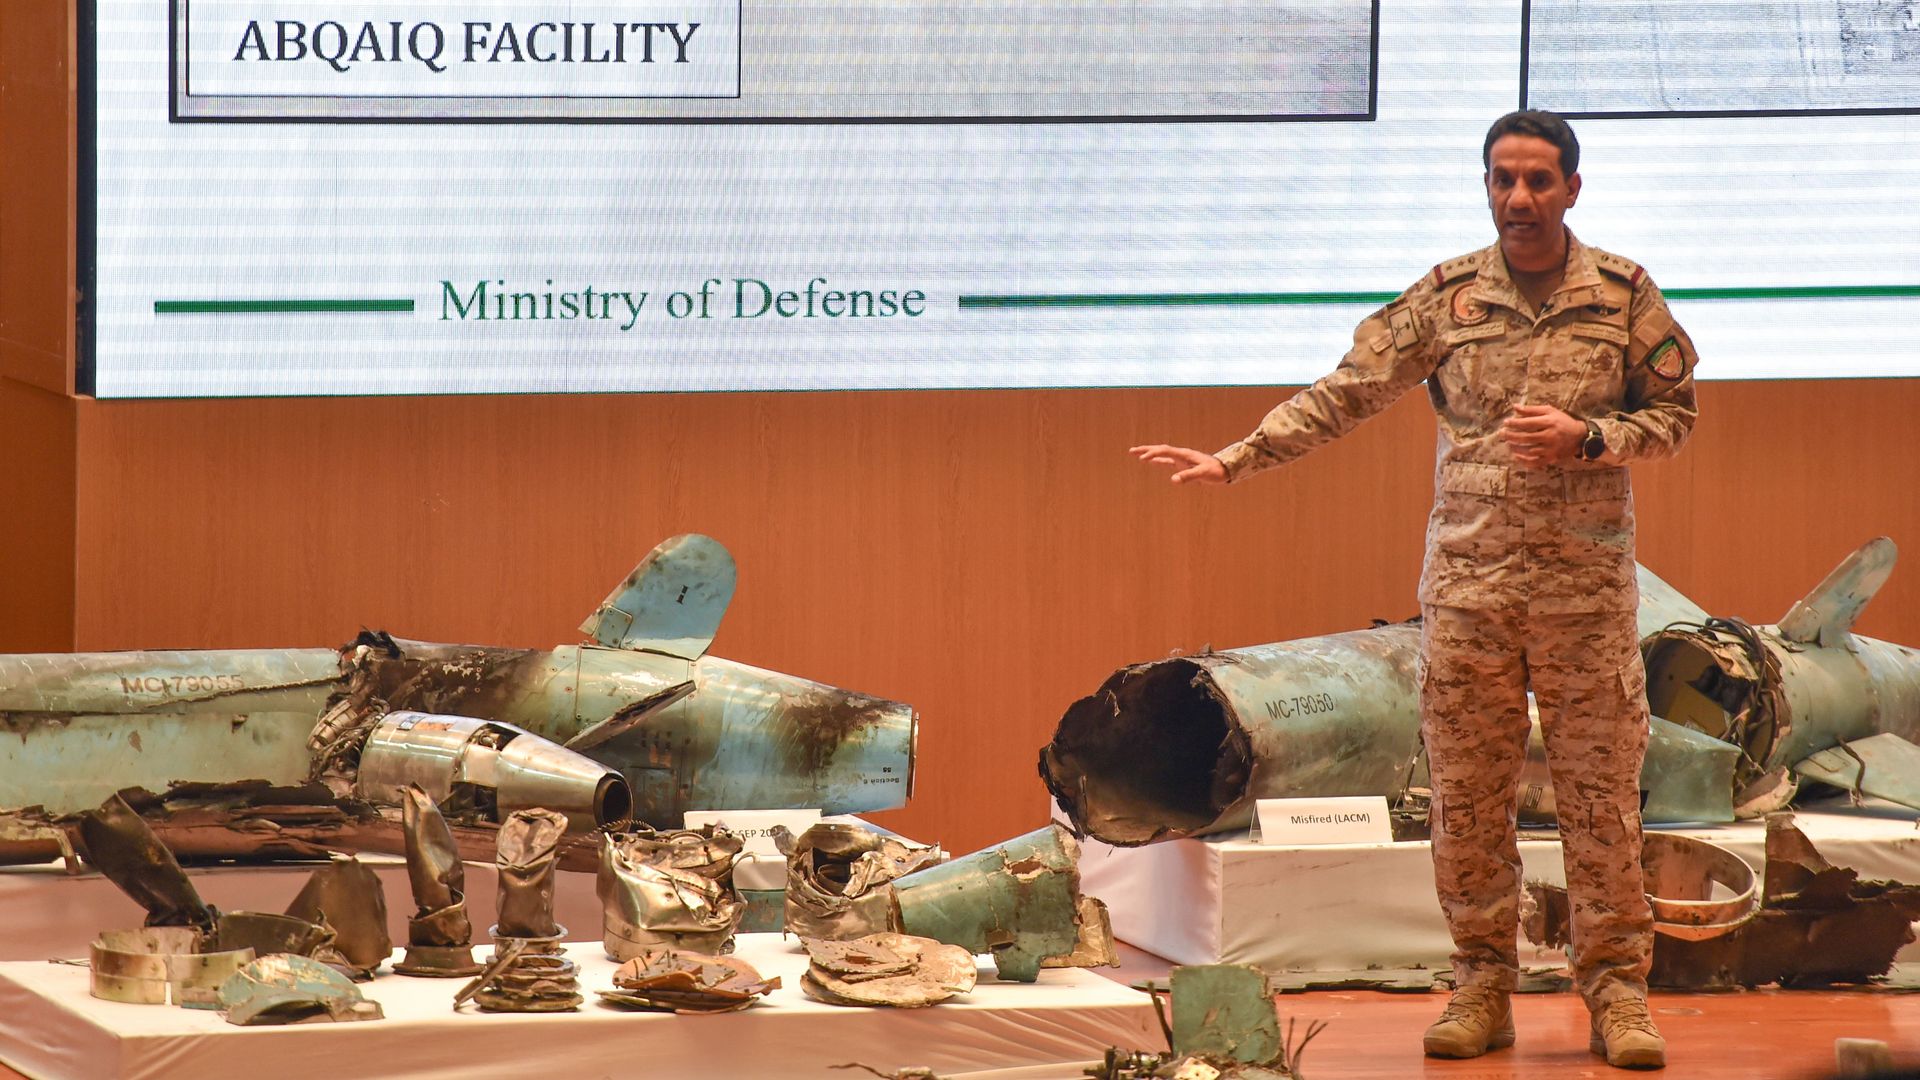 Saudi defense minister on stage with weapons remnants from the weekend's attack on its oil facilities